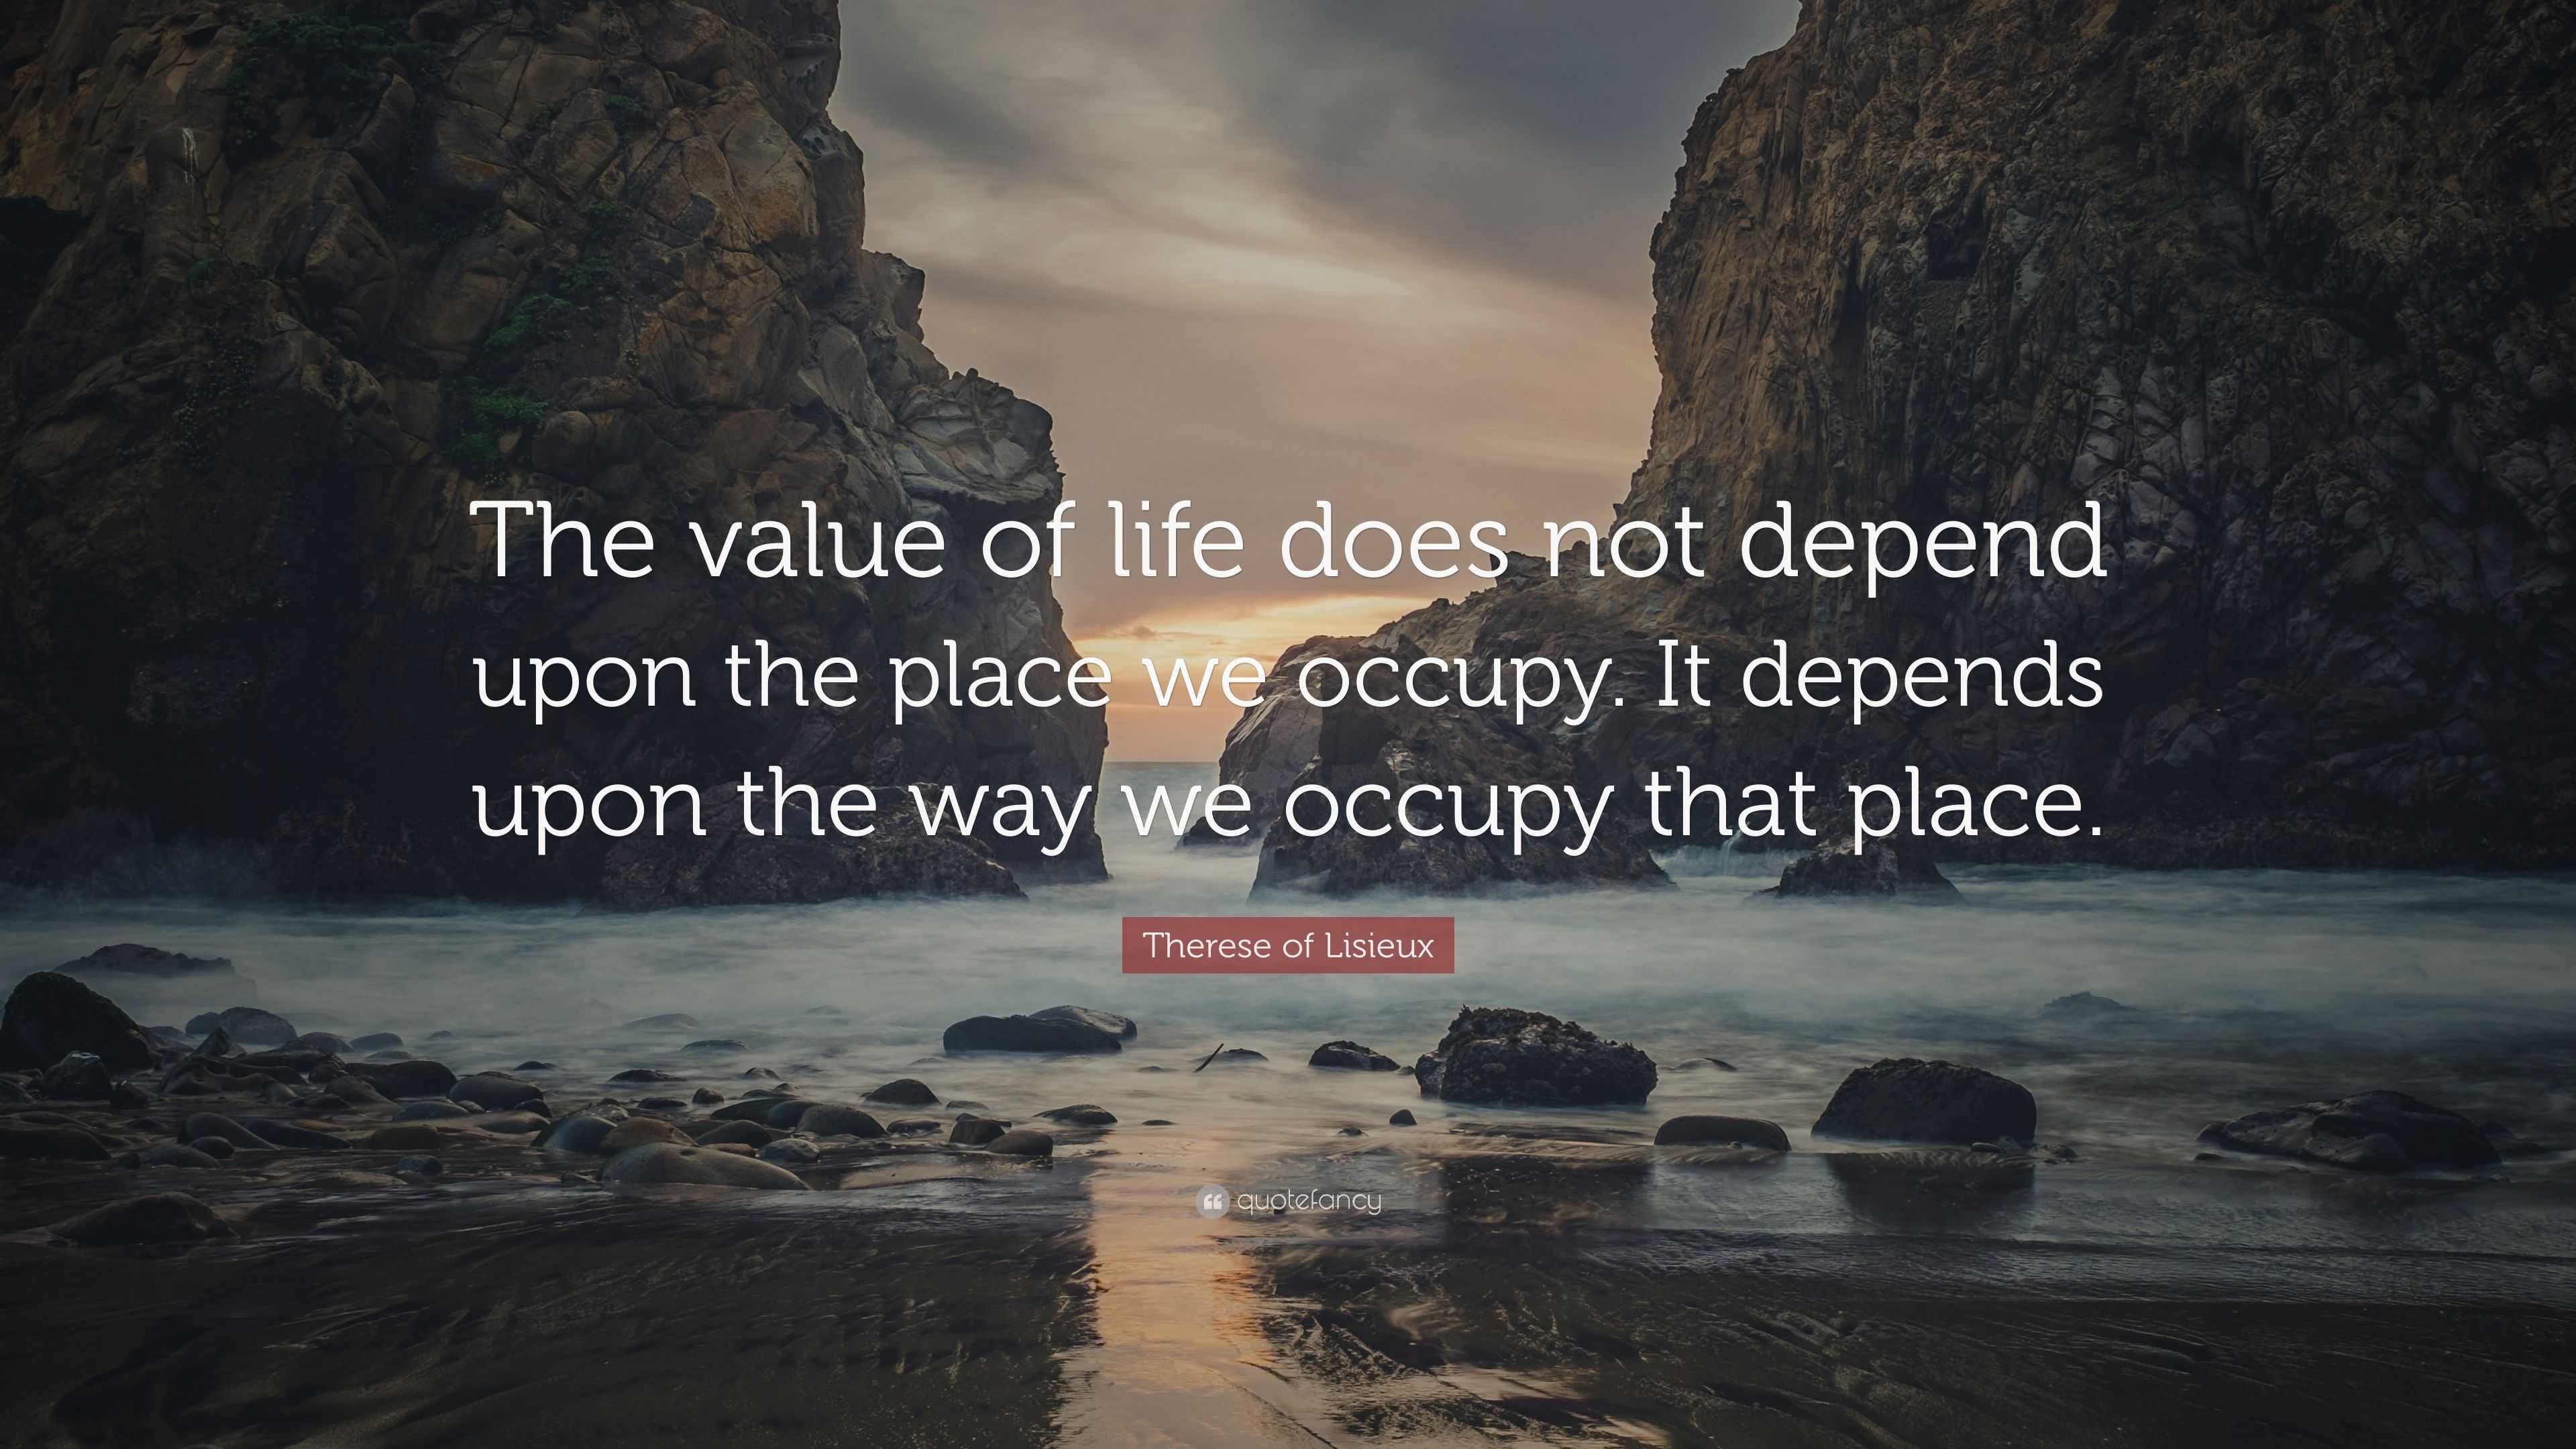 Therese of Lisieux Quote: “The value of life does not depend upon the ...